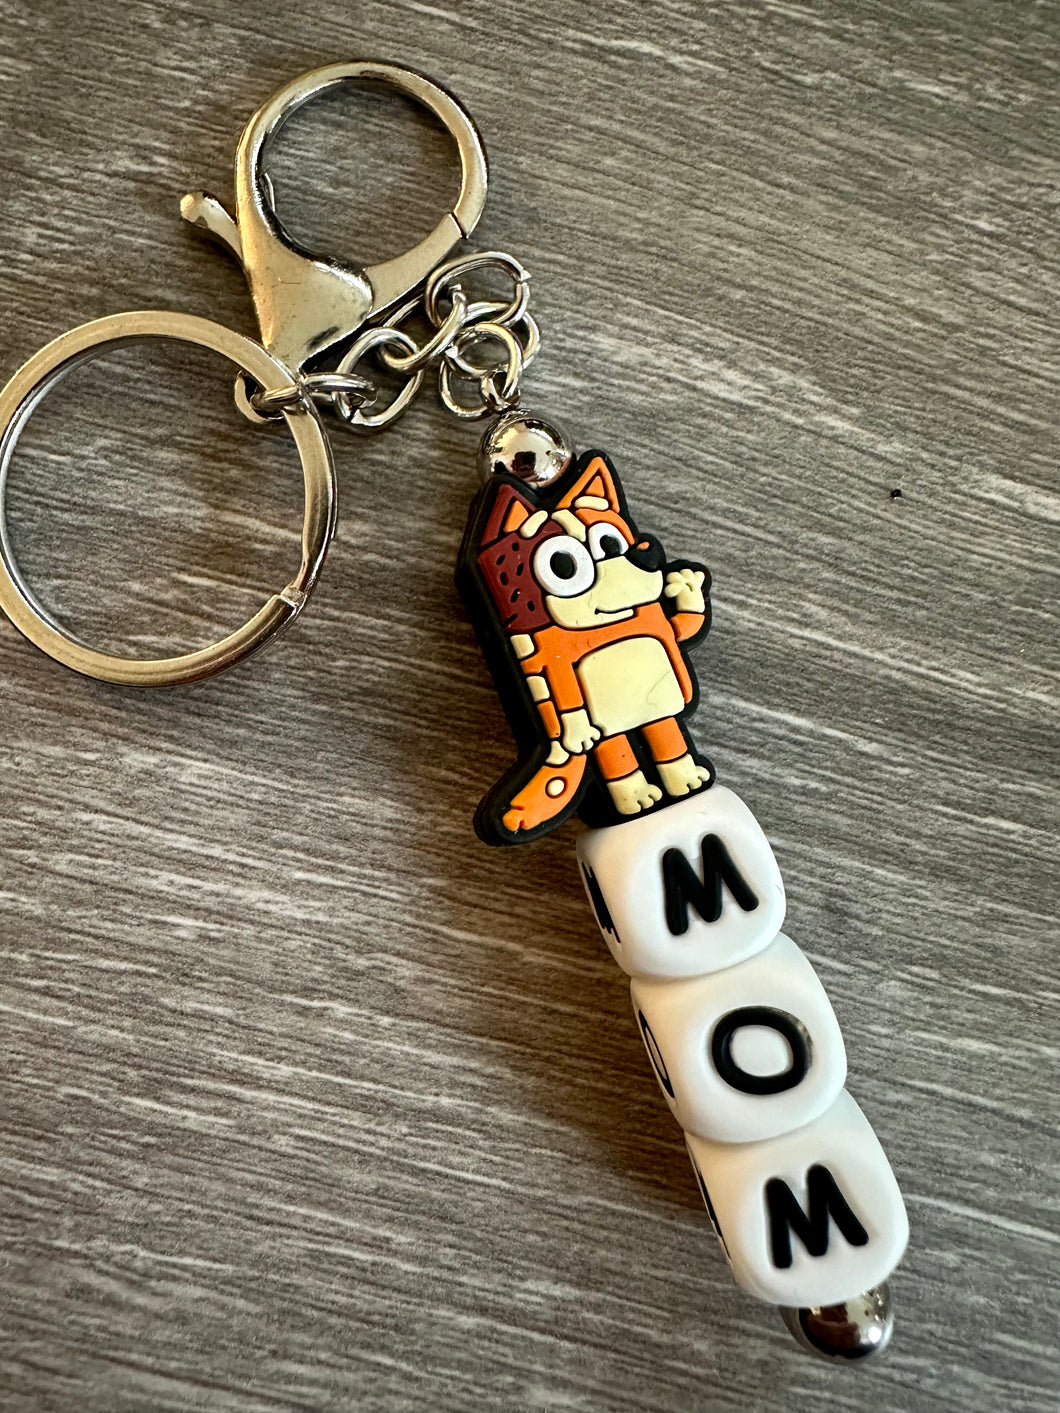 This is Love- Chilli Mom keychain